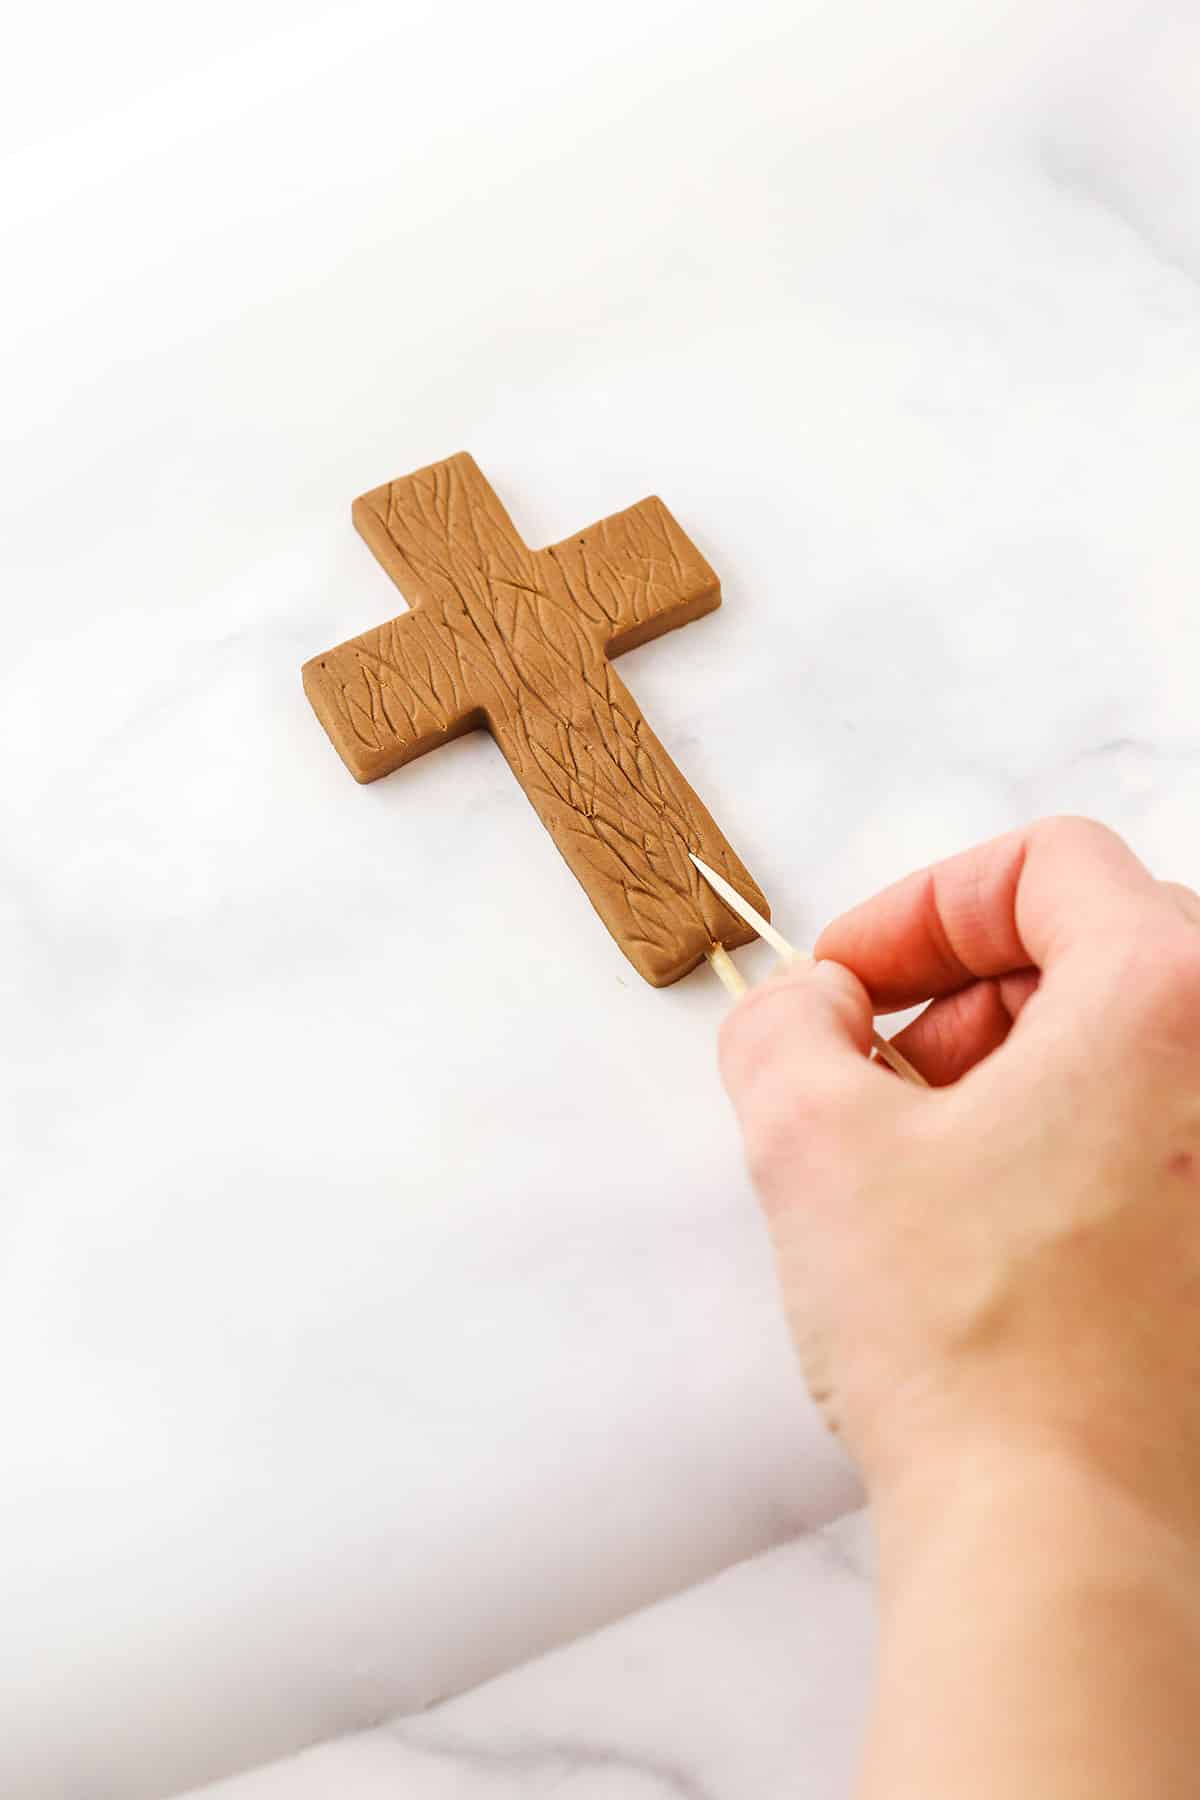 A step in making a Resurrection Cake showing the use of a toothpick to texturize the cross